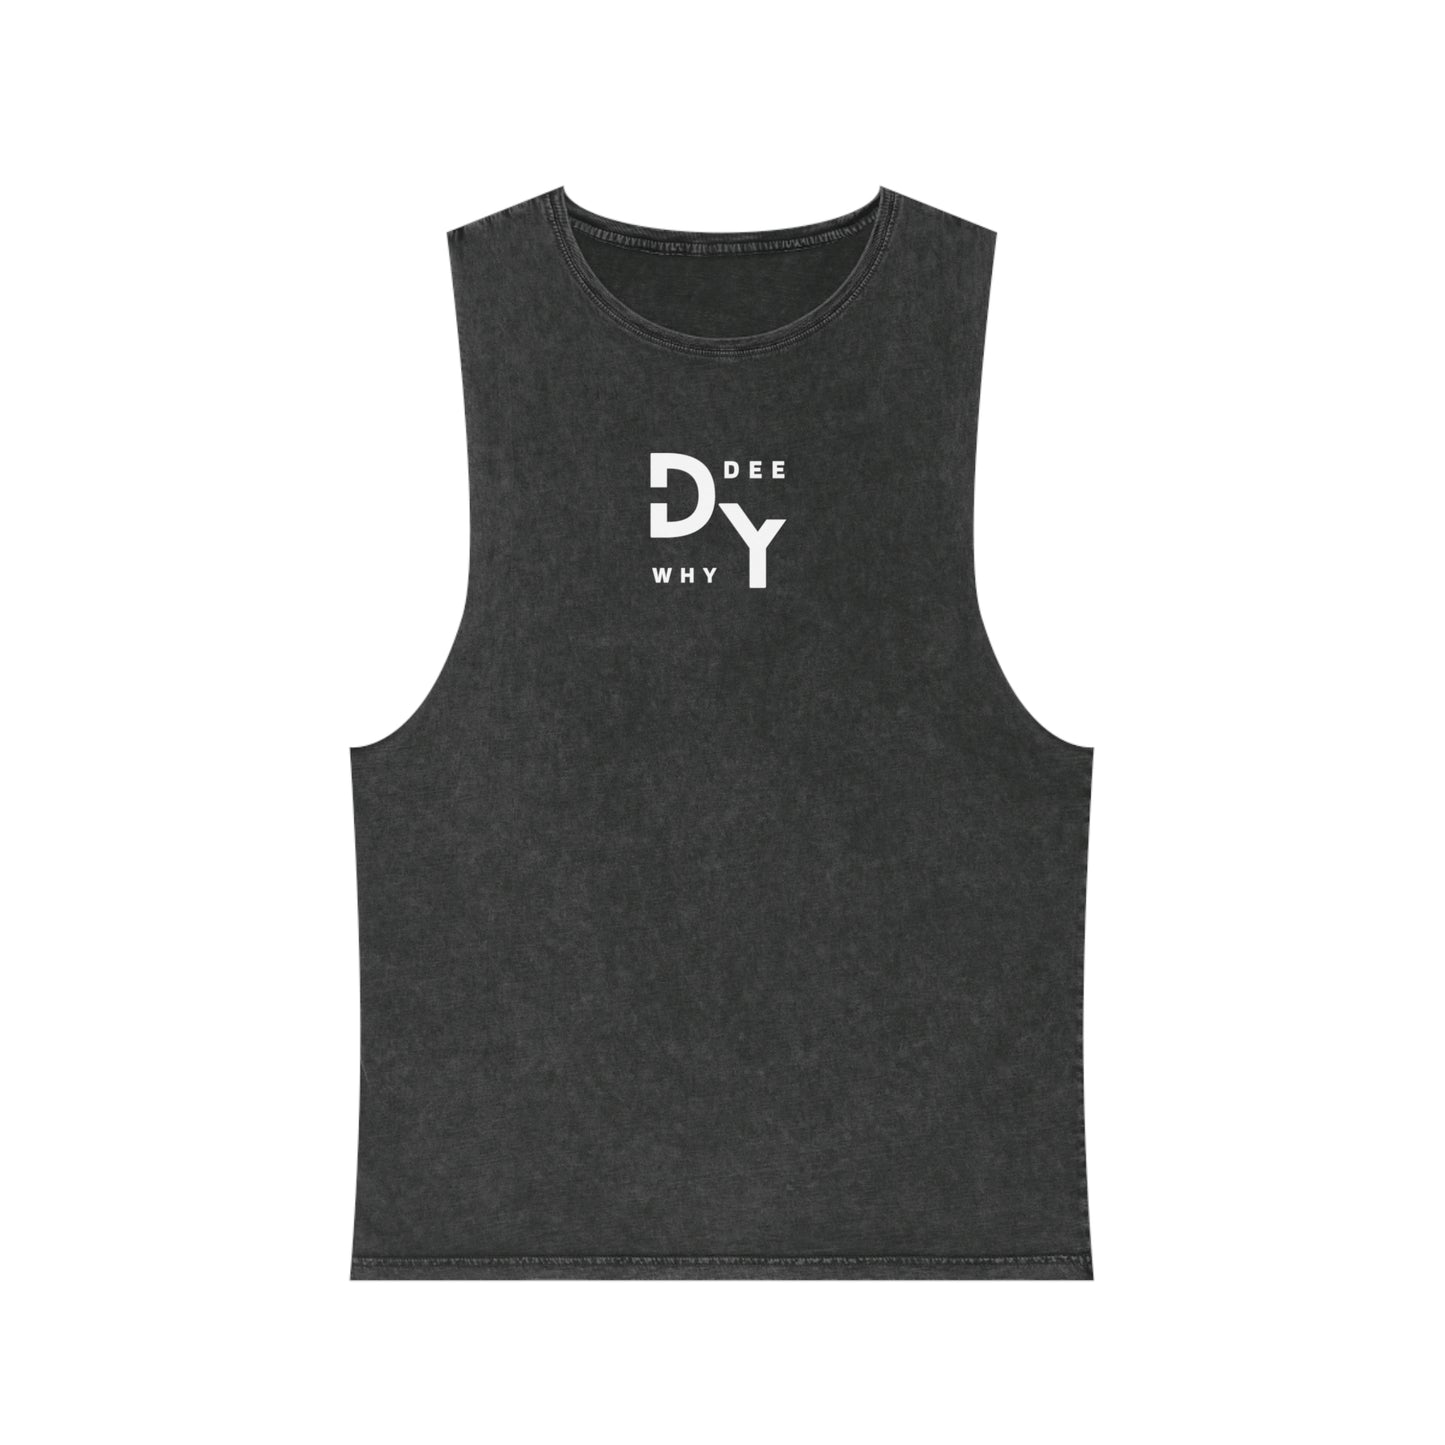 Stonewash Tank Top with Northern Beaches Dee Why logo